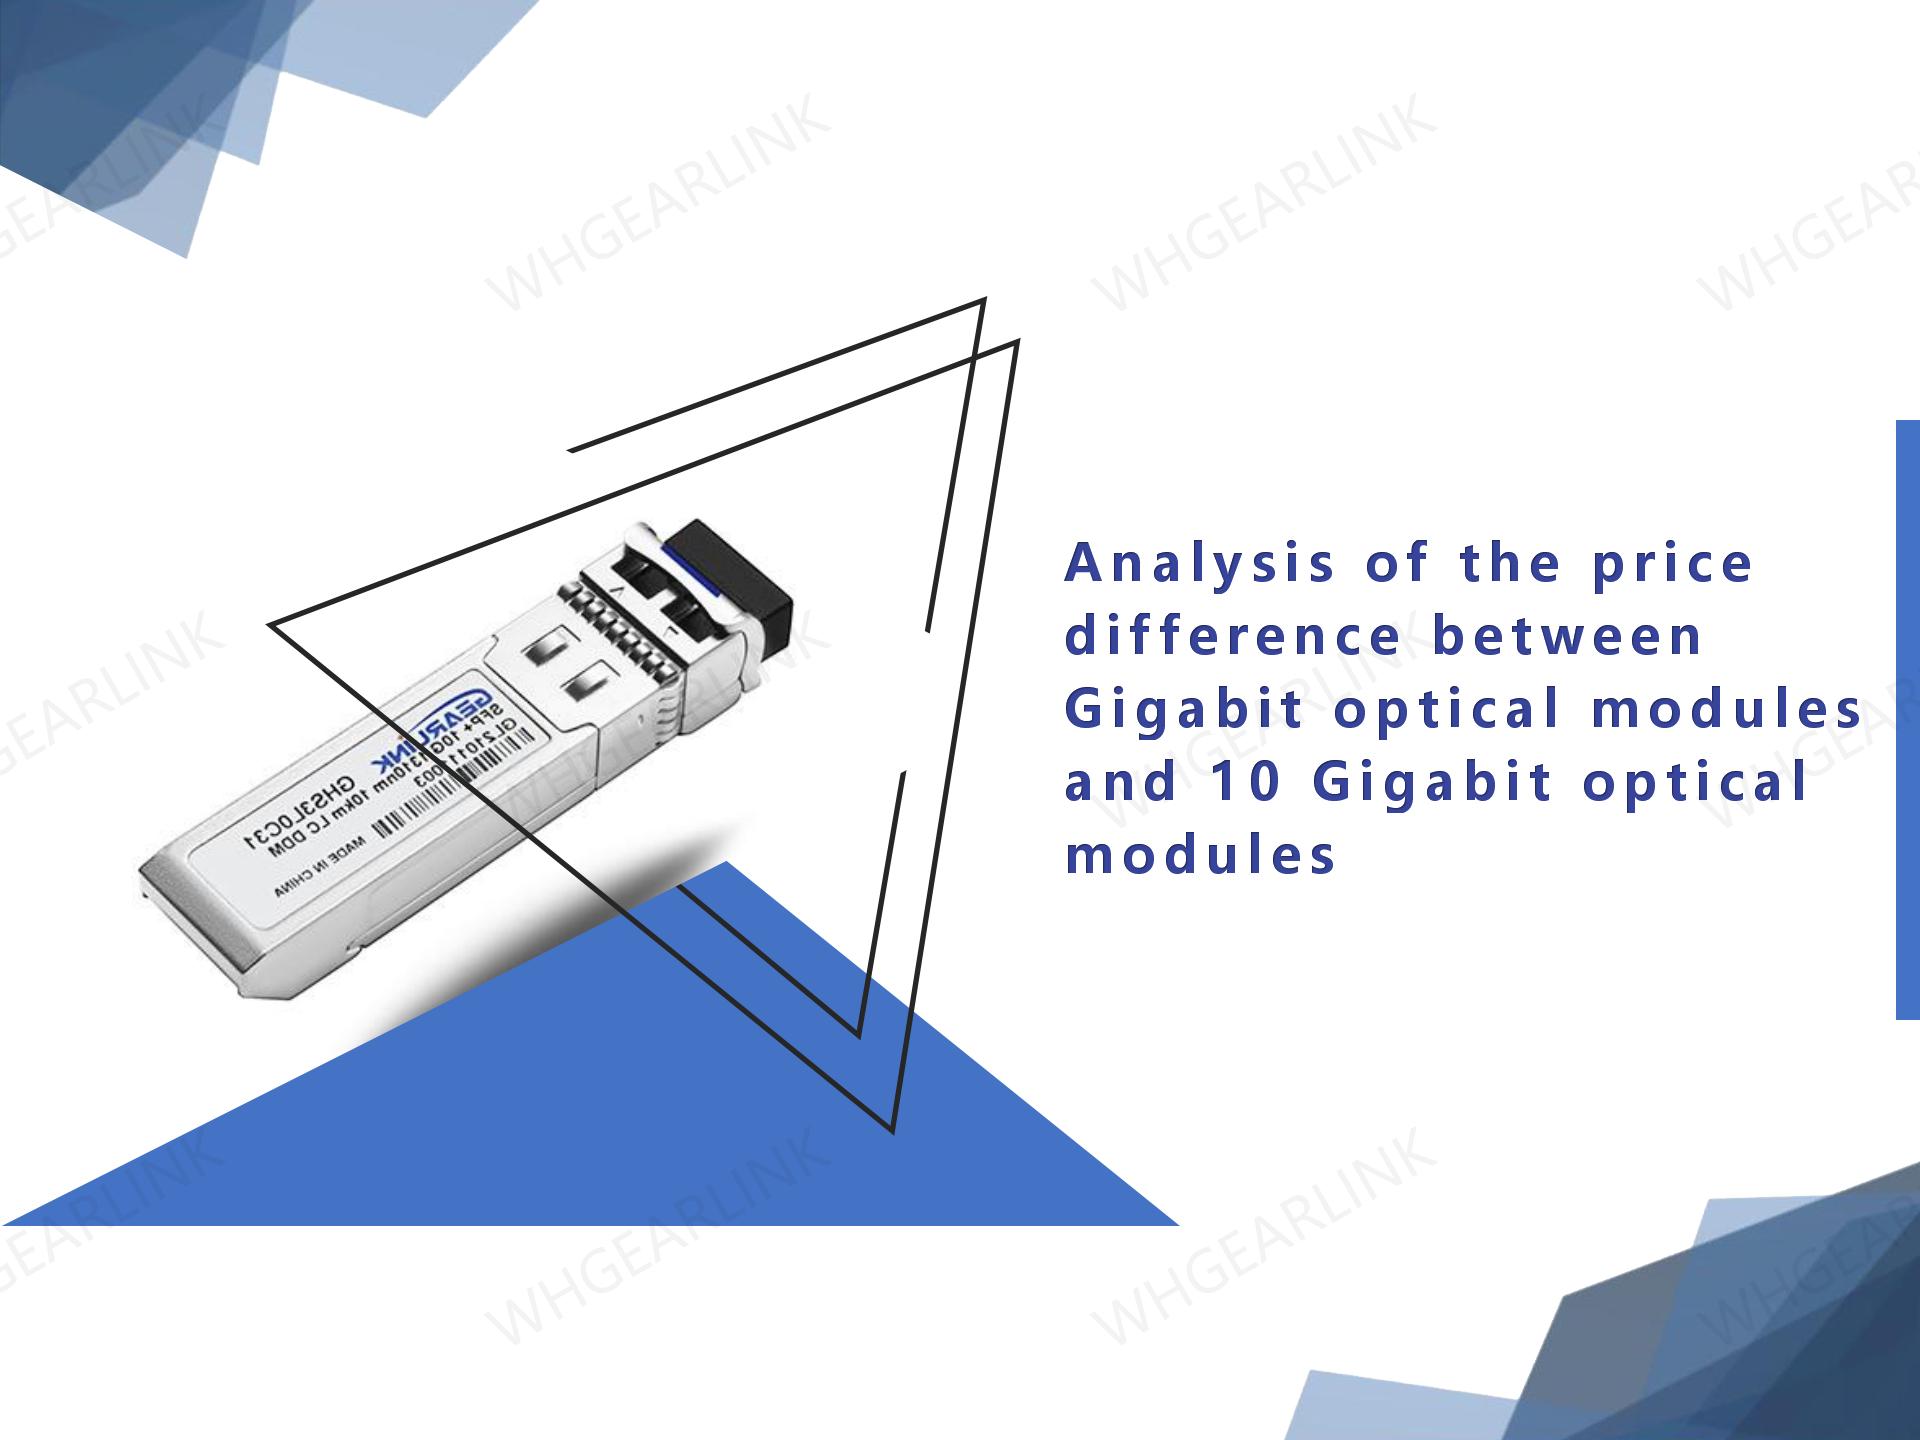 Analysis of the price difference between Gigabit optical modules and 10 Gigabit optical modules